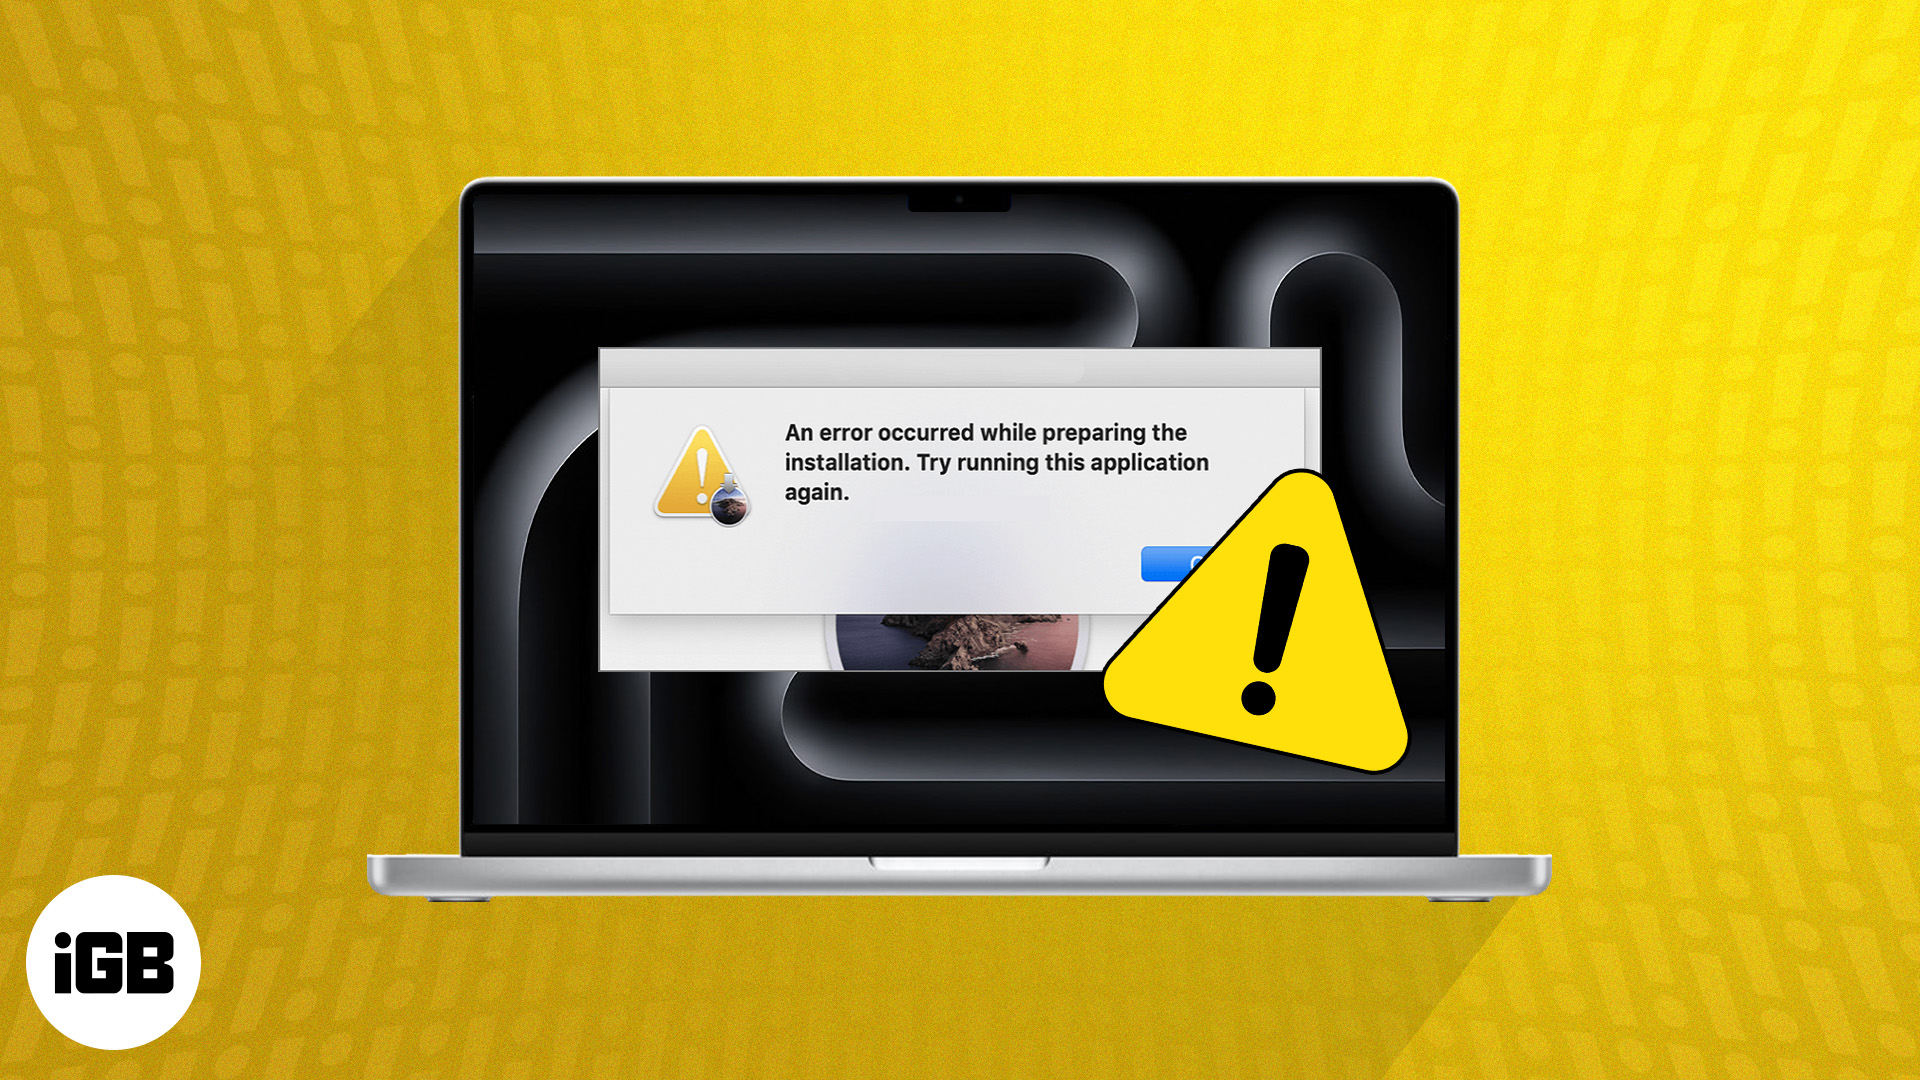 How to fix “an error occurred while preparing the installation” issue on Mac